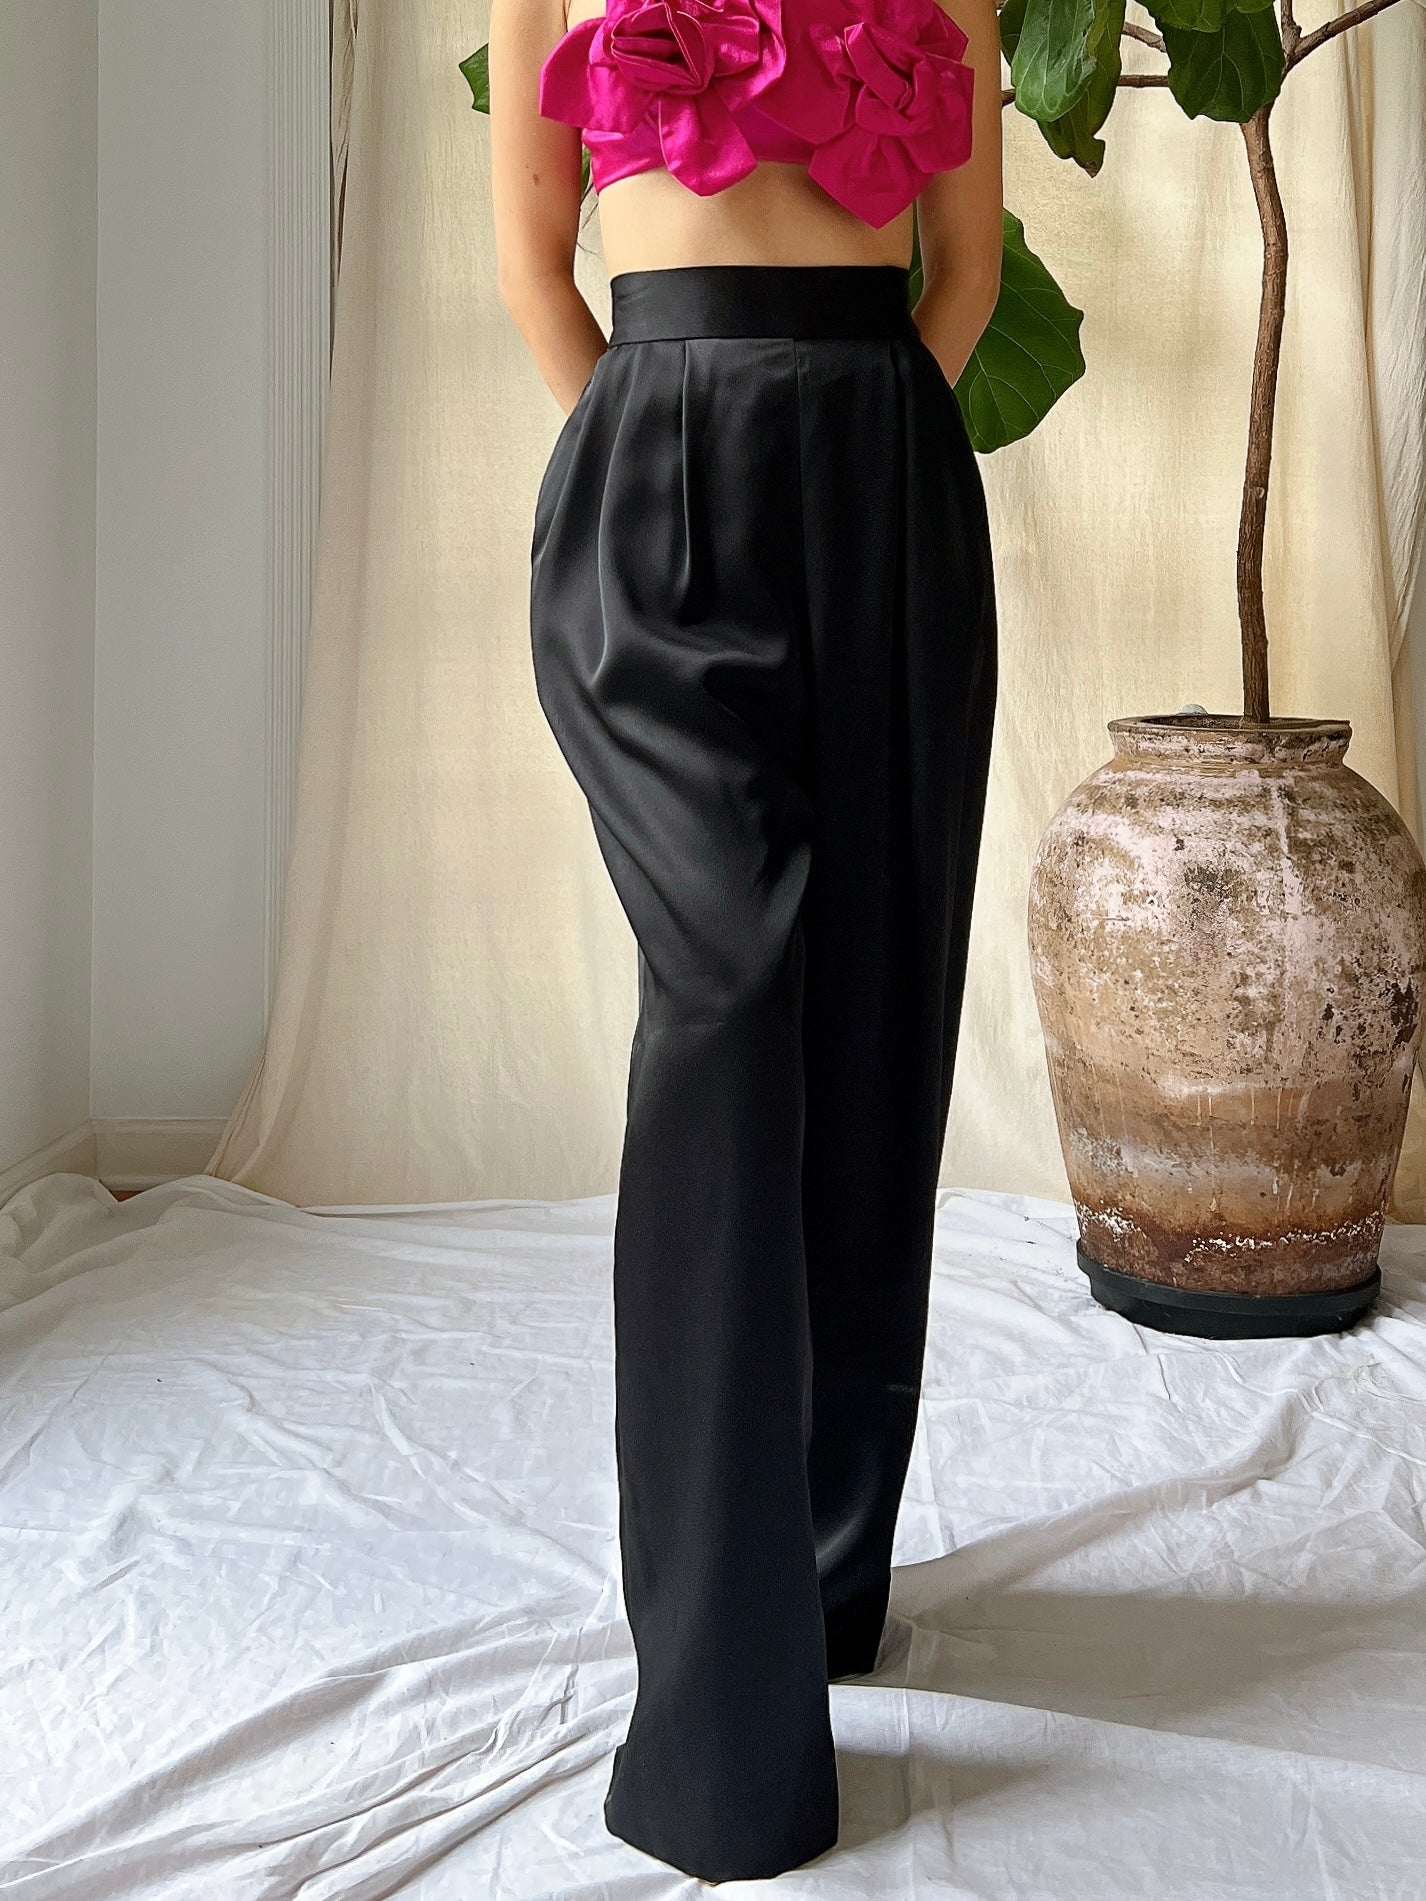 Vintage Satin High-Waisted Trousers - S/4/6